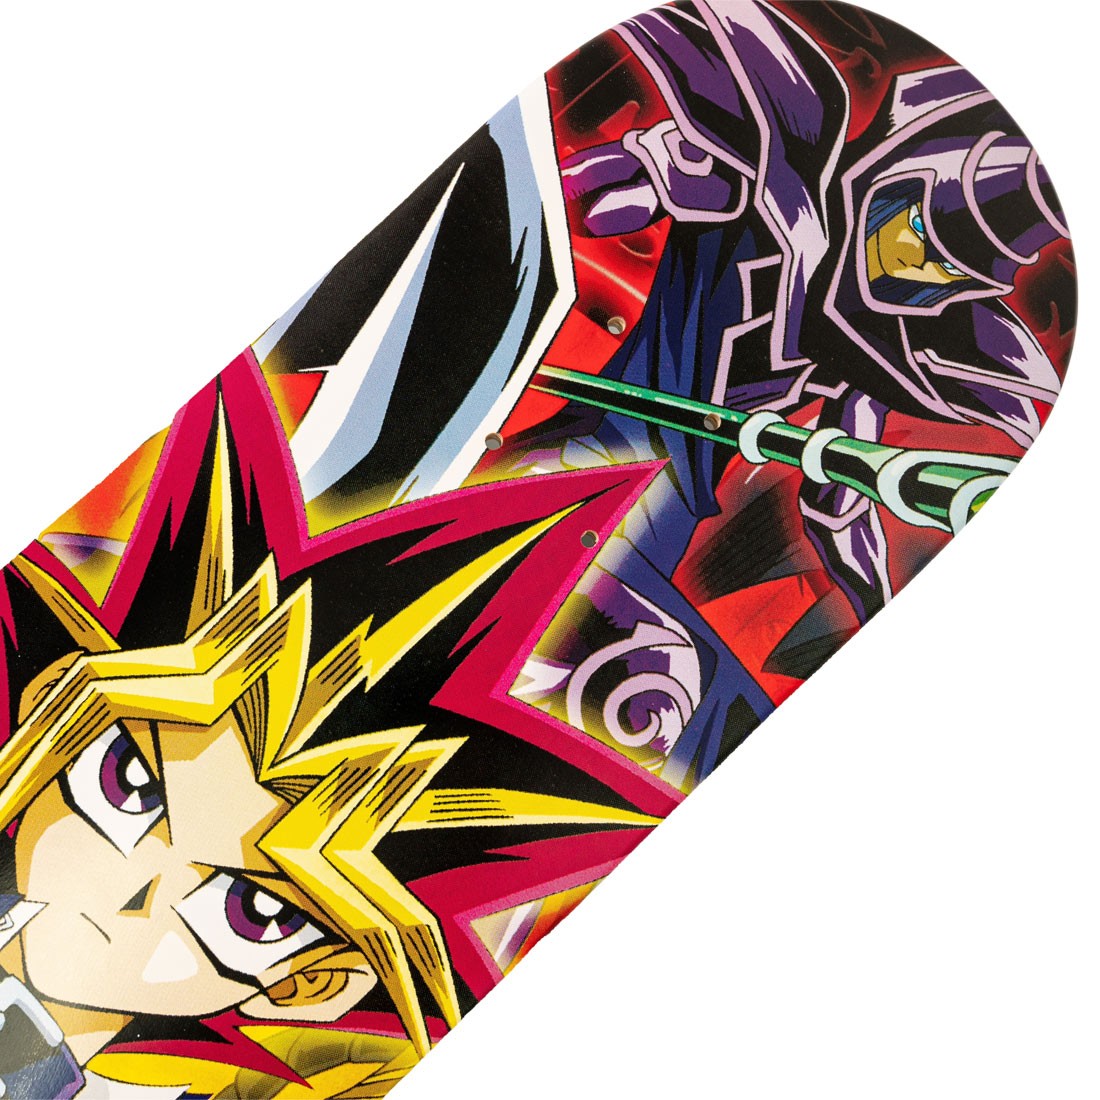 BAIT x Yu-Gi-Oh Skateboard Deck Set of 3 - Limited Out of 300 (black)